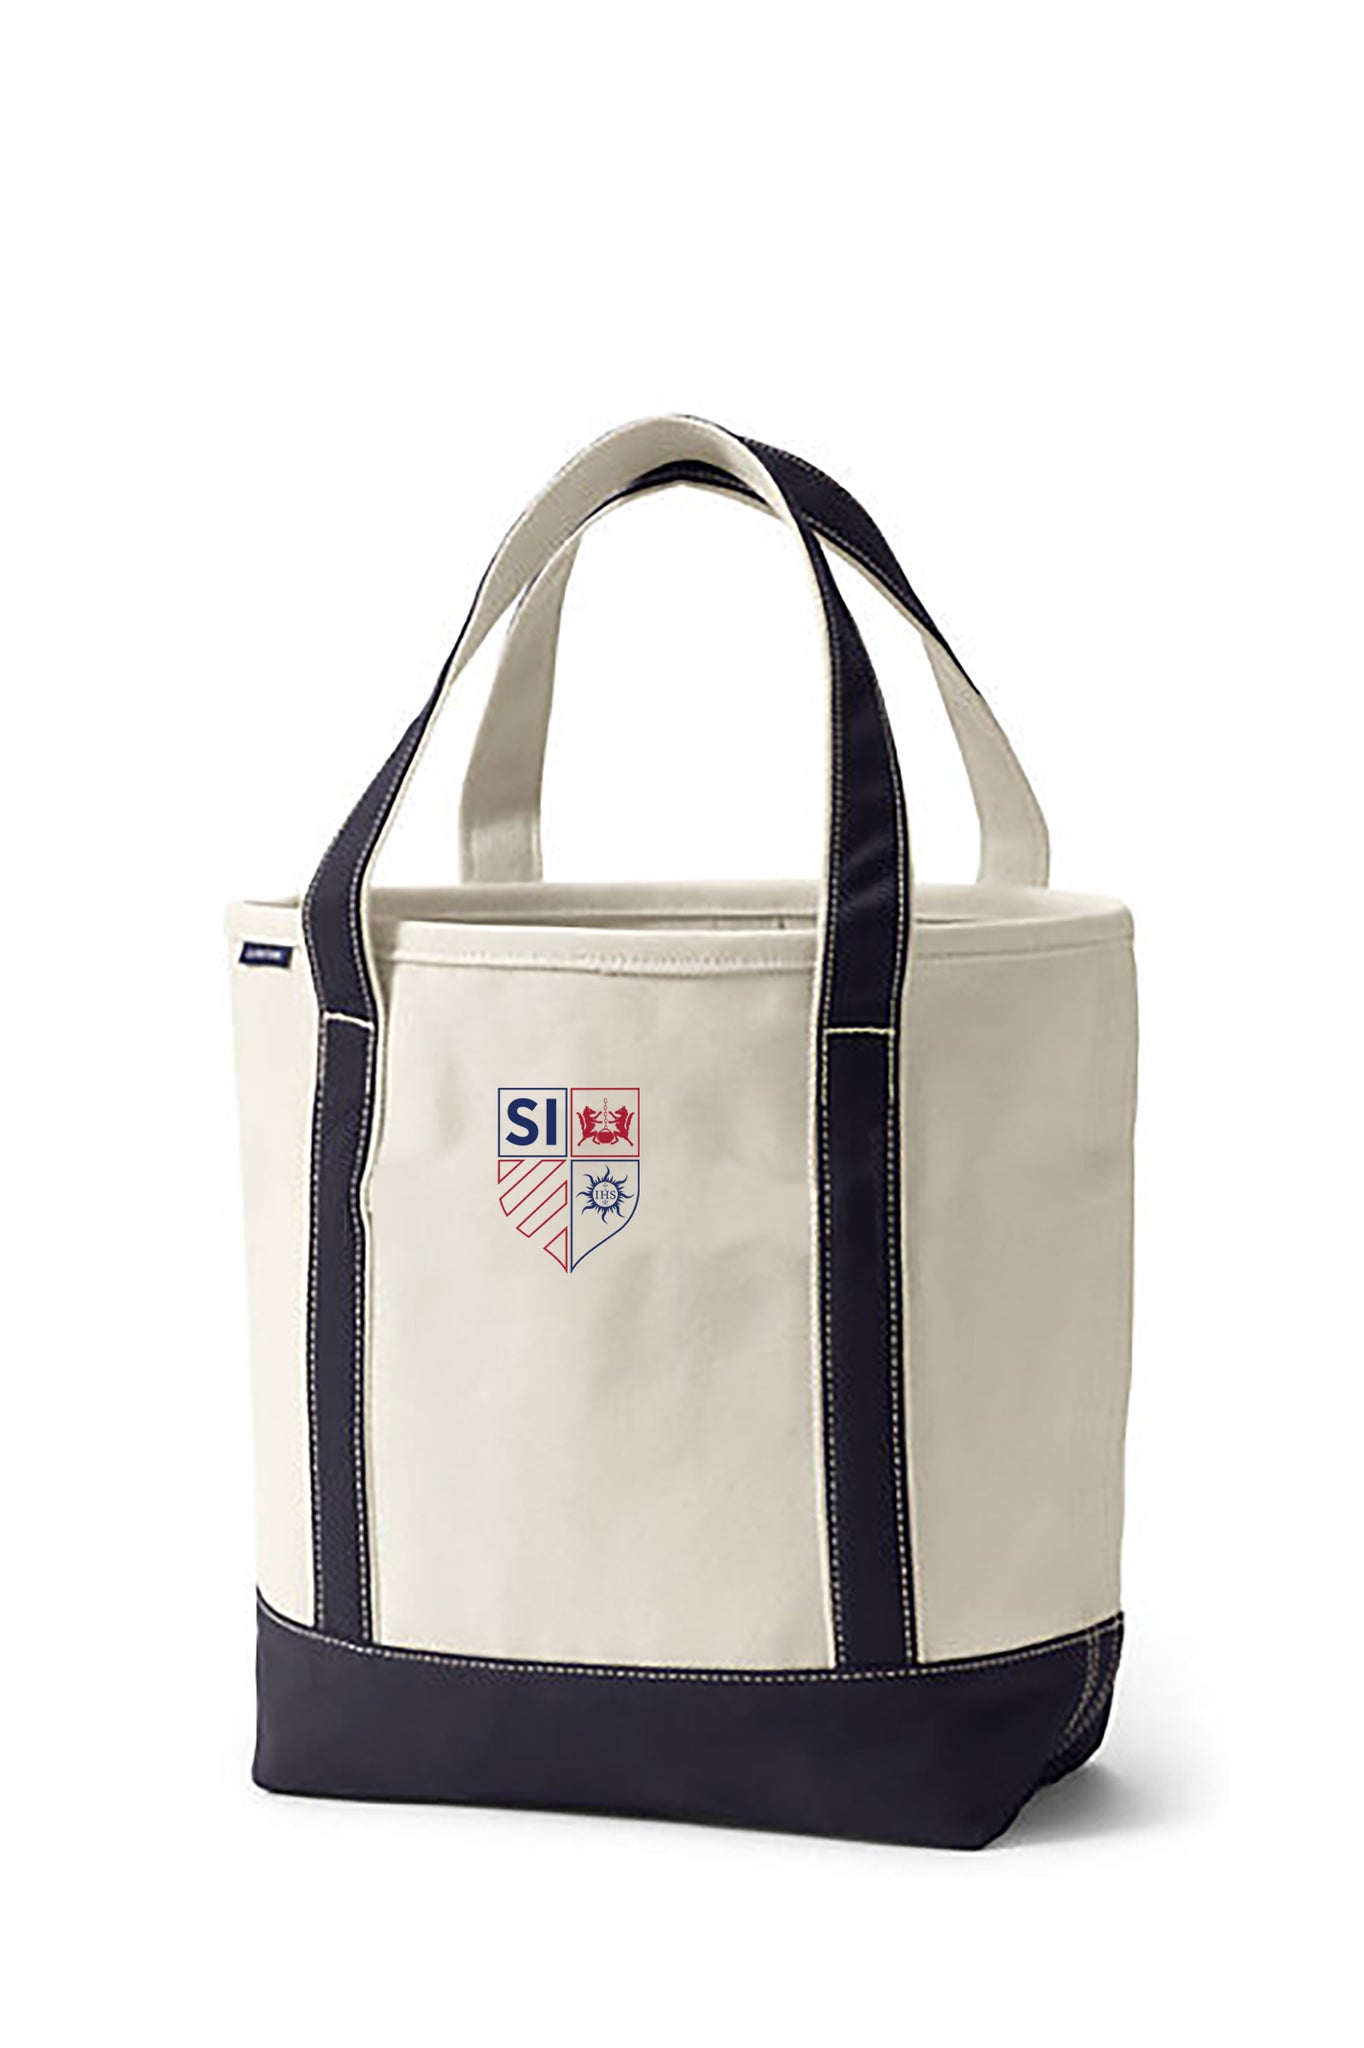 Land's End SI Tote Bag